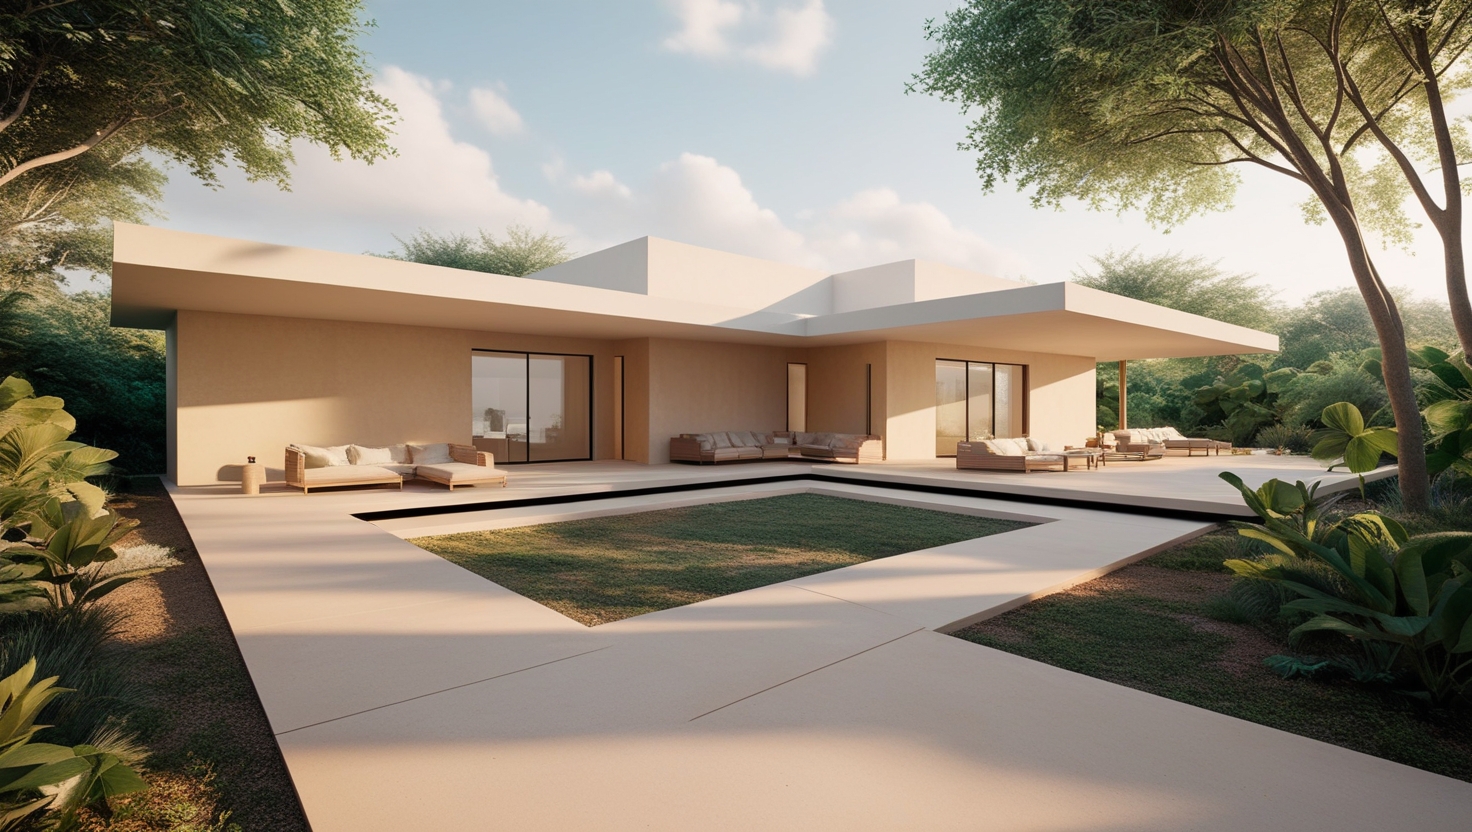 Minimalist house with patios and walkways concept 3